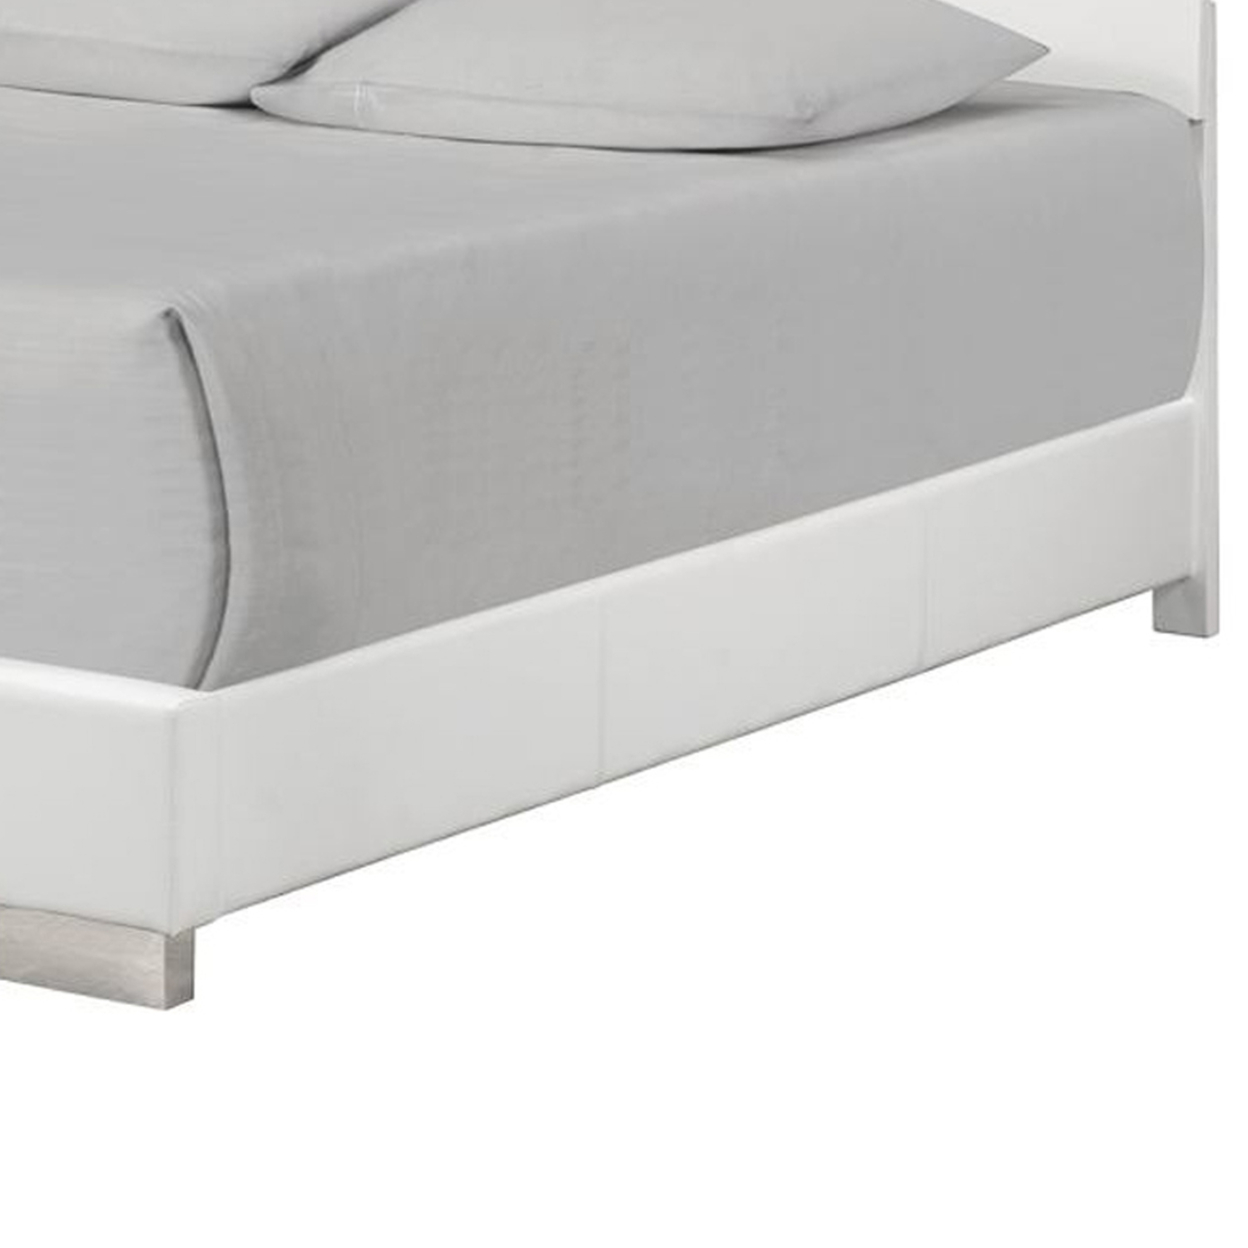 Wooden Queen Size Bed With Plank Style Headboard, White- Saltoro Sherpi